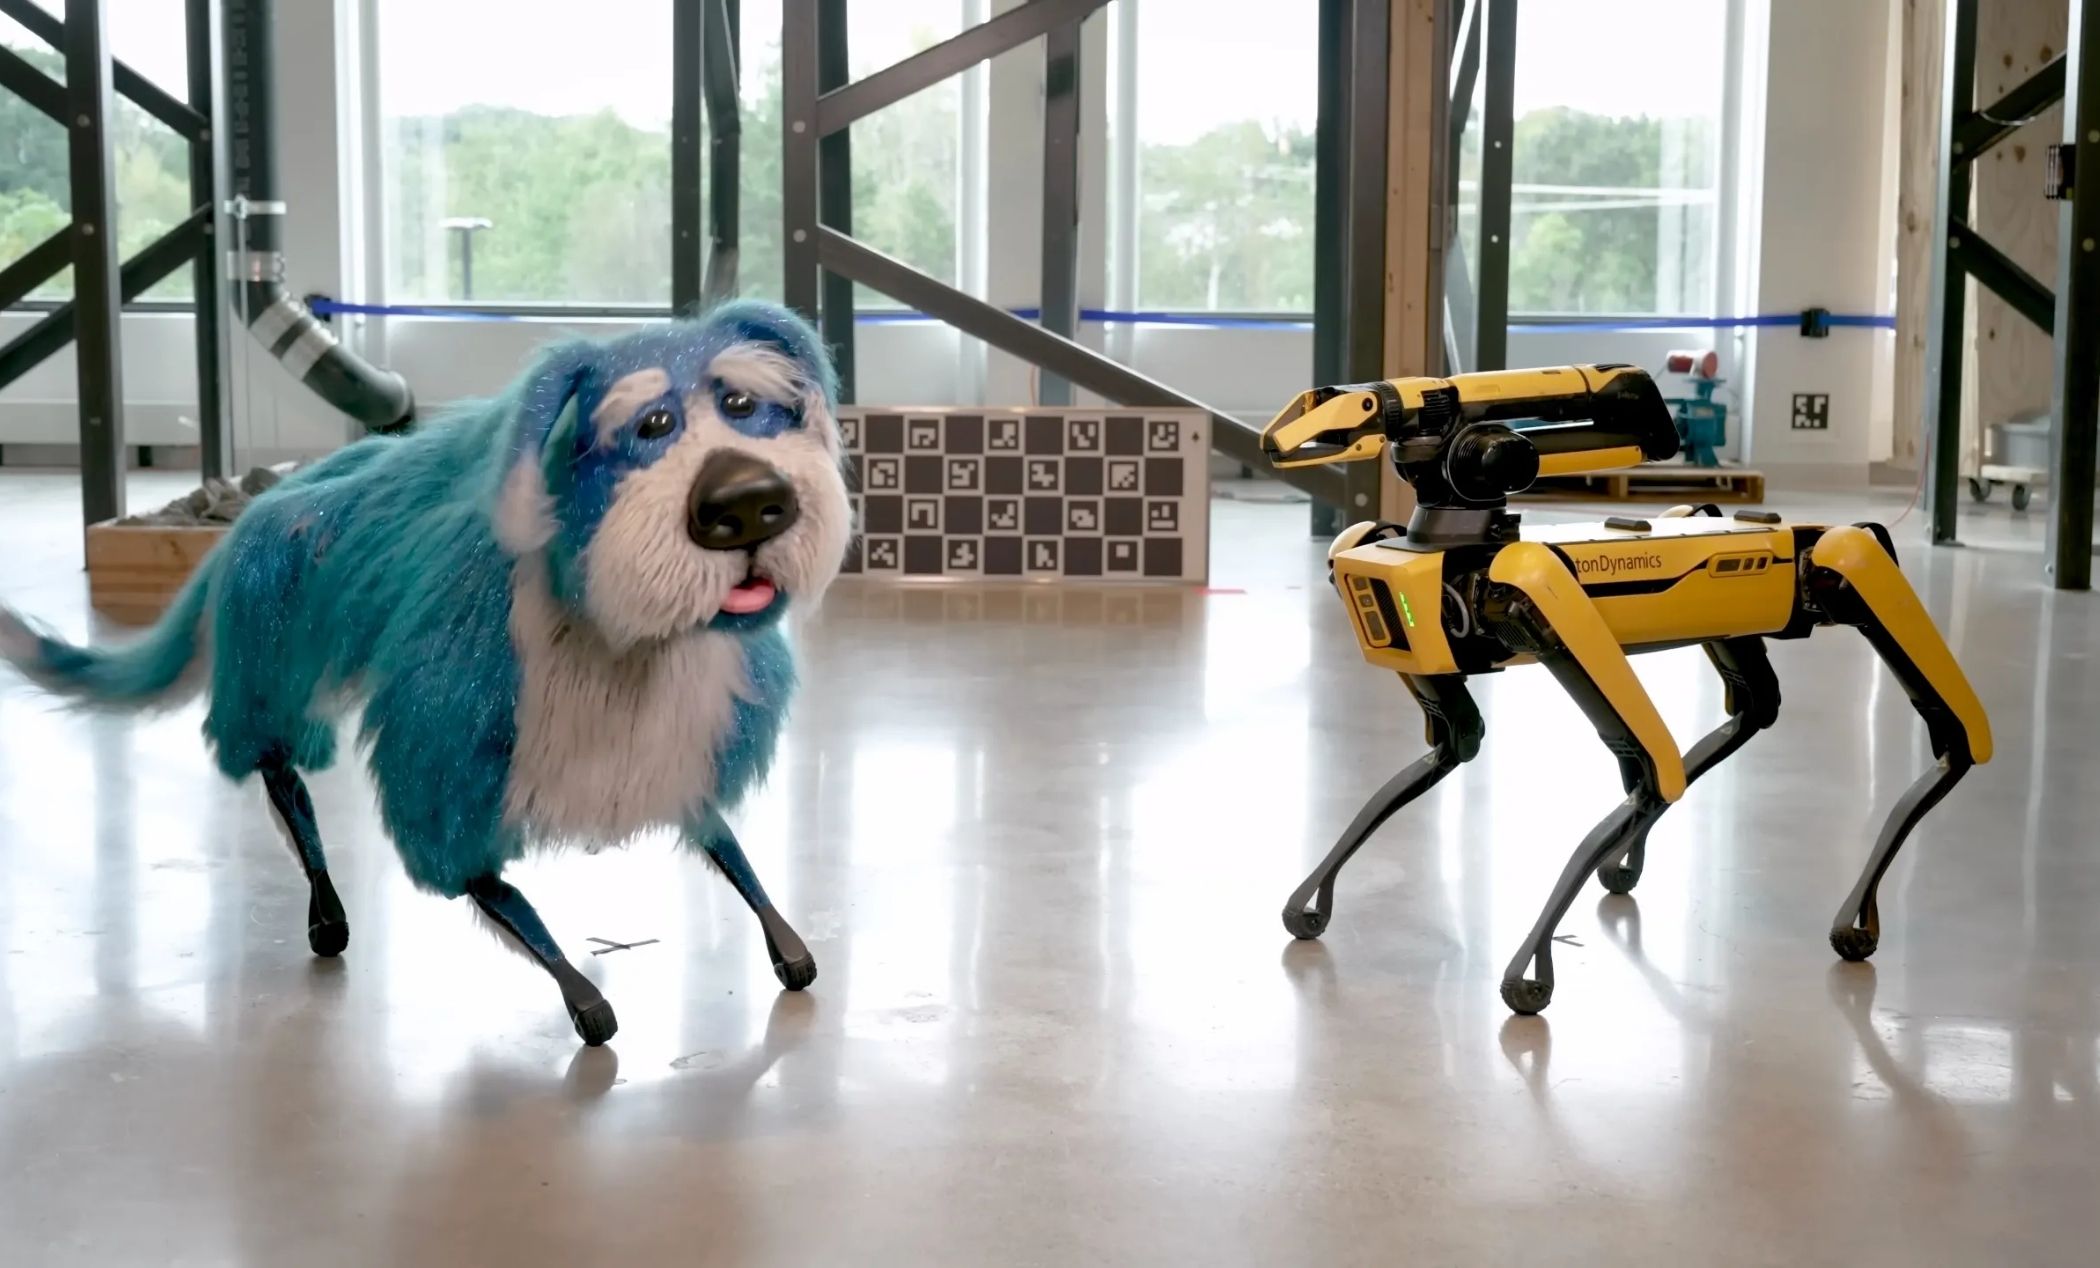 Boston Dynamics unveils its fur-covered dancing robot dog; Watch the viral video